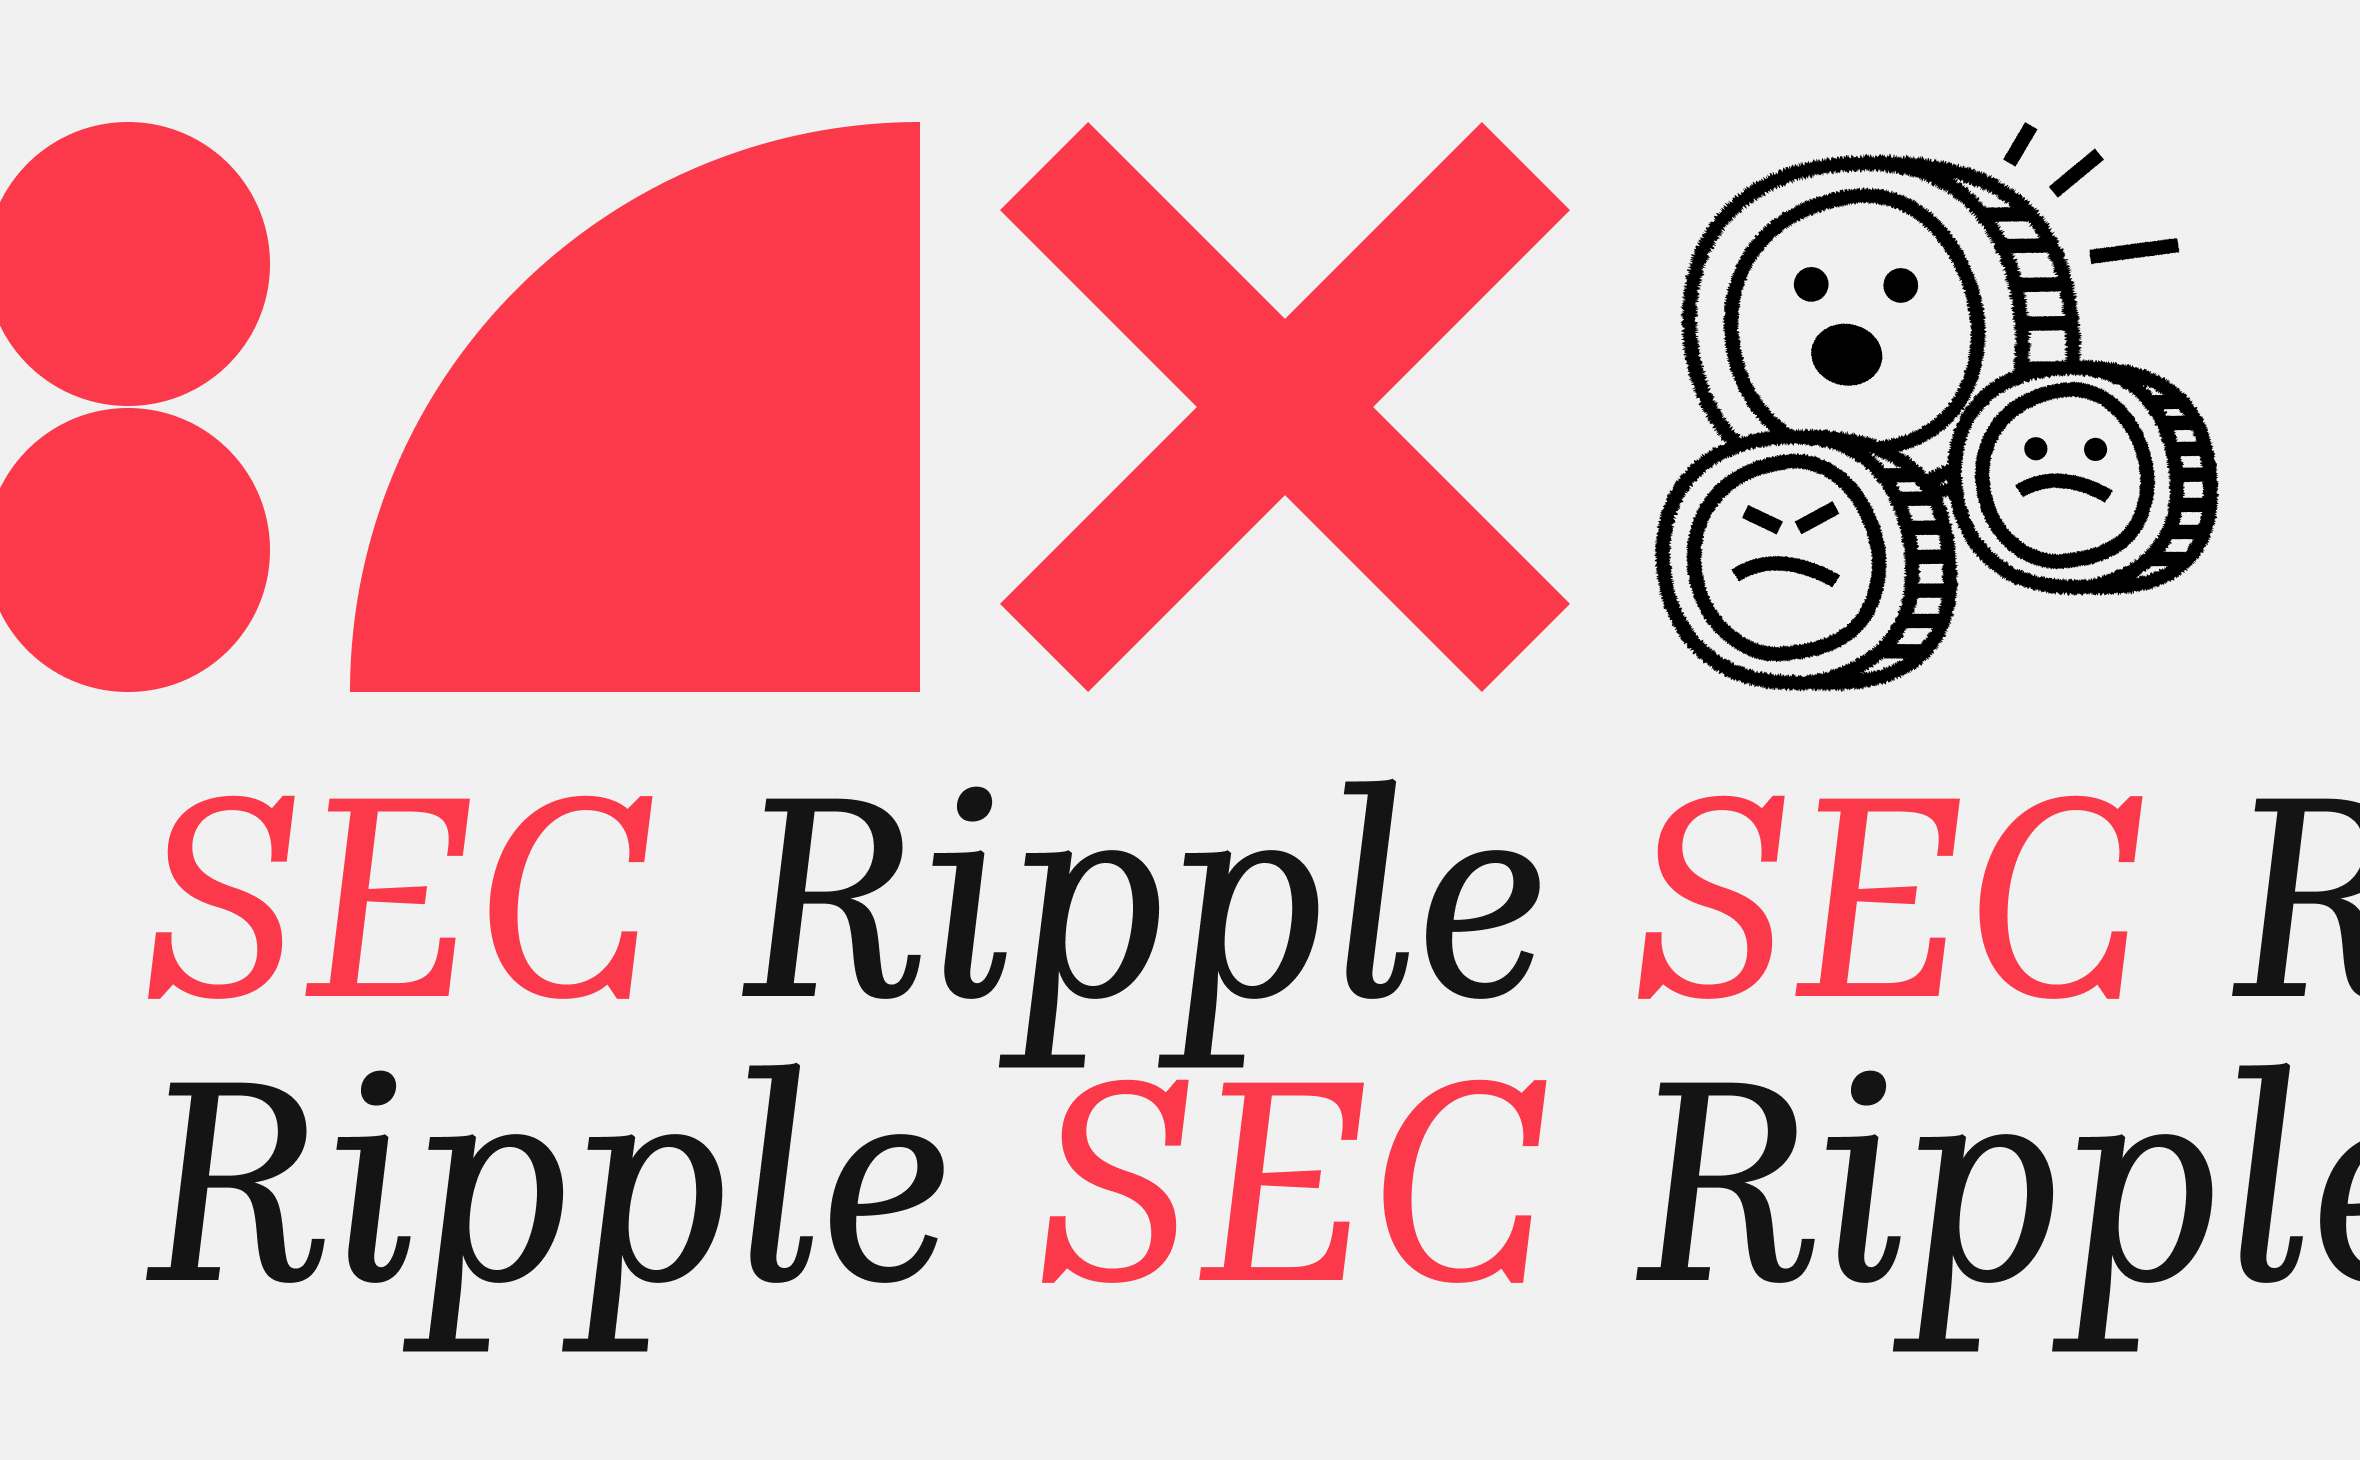 XRP Lawsuit: SEC Requests Change To Remedies Briefing Deadlines